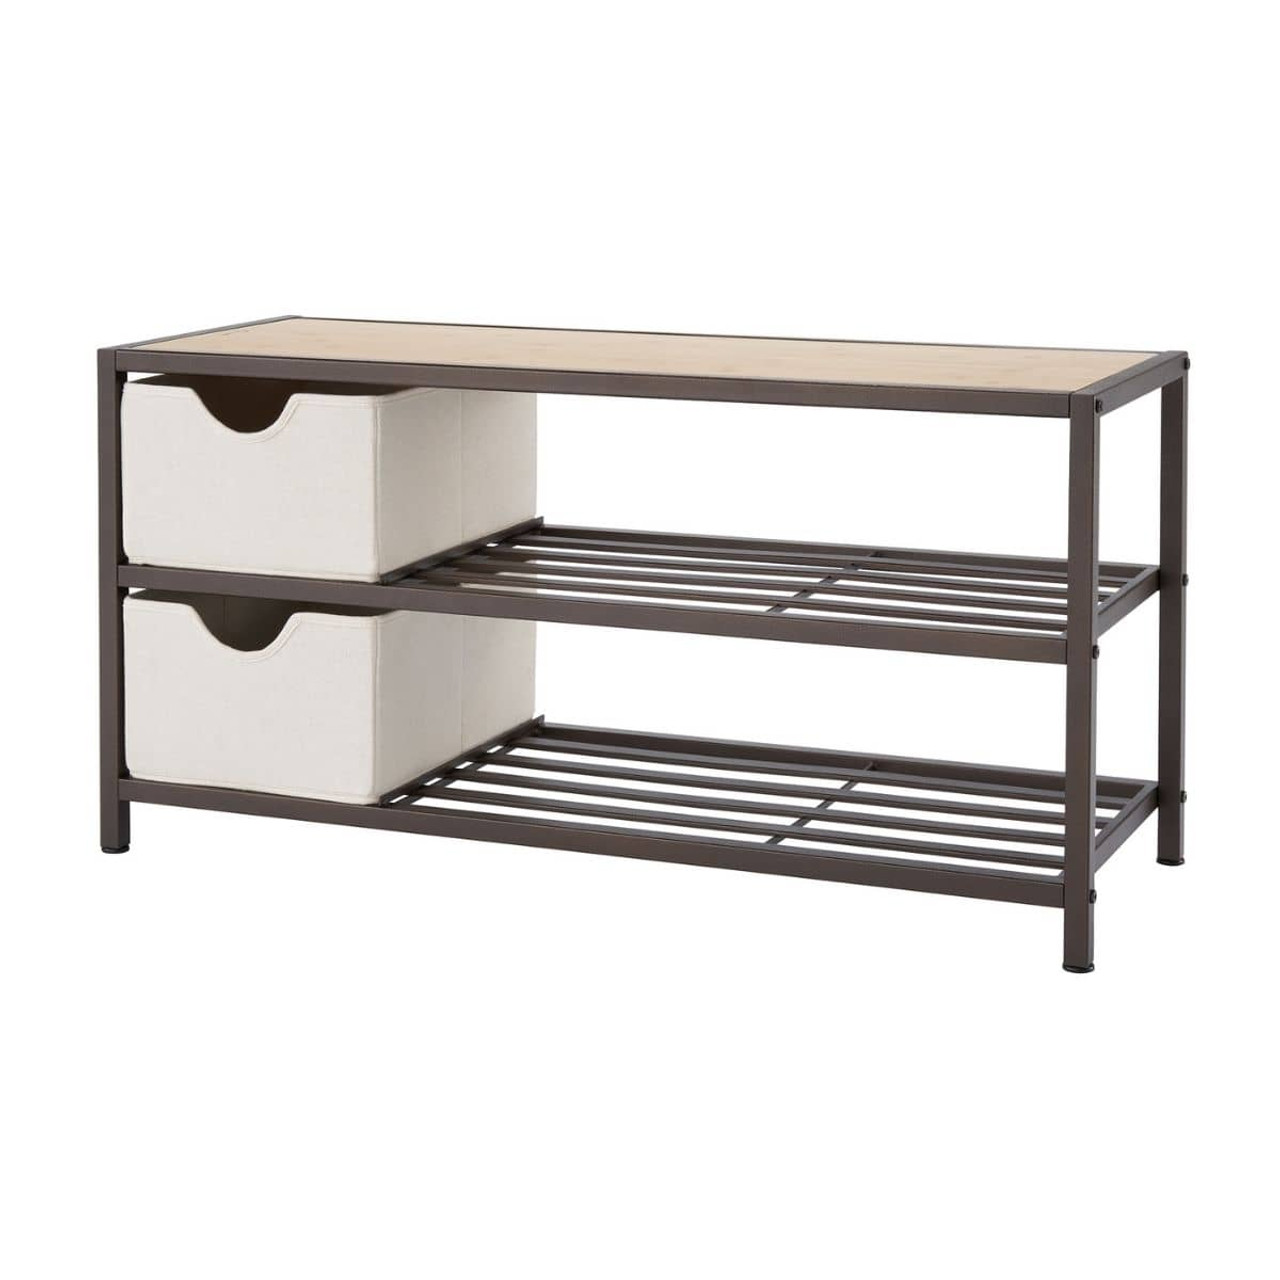 3-Tier Shoe Rack Storage Shelves with Seat - On Sale - Bed Bath